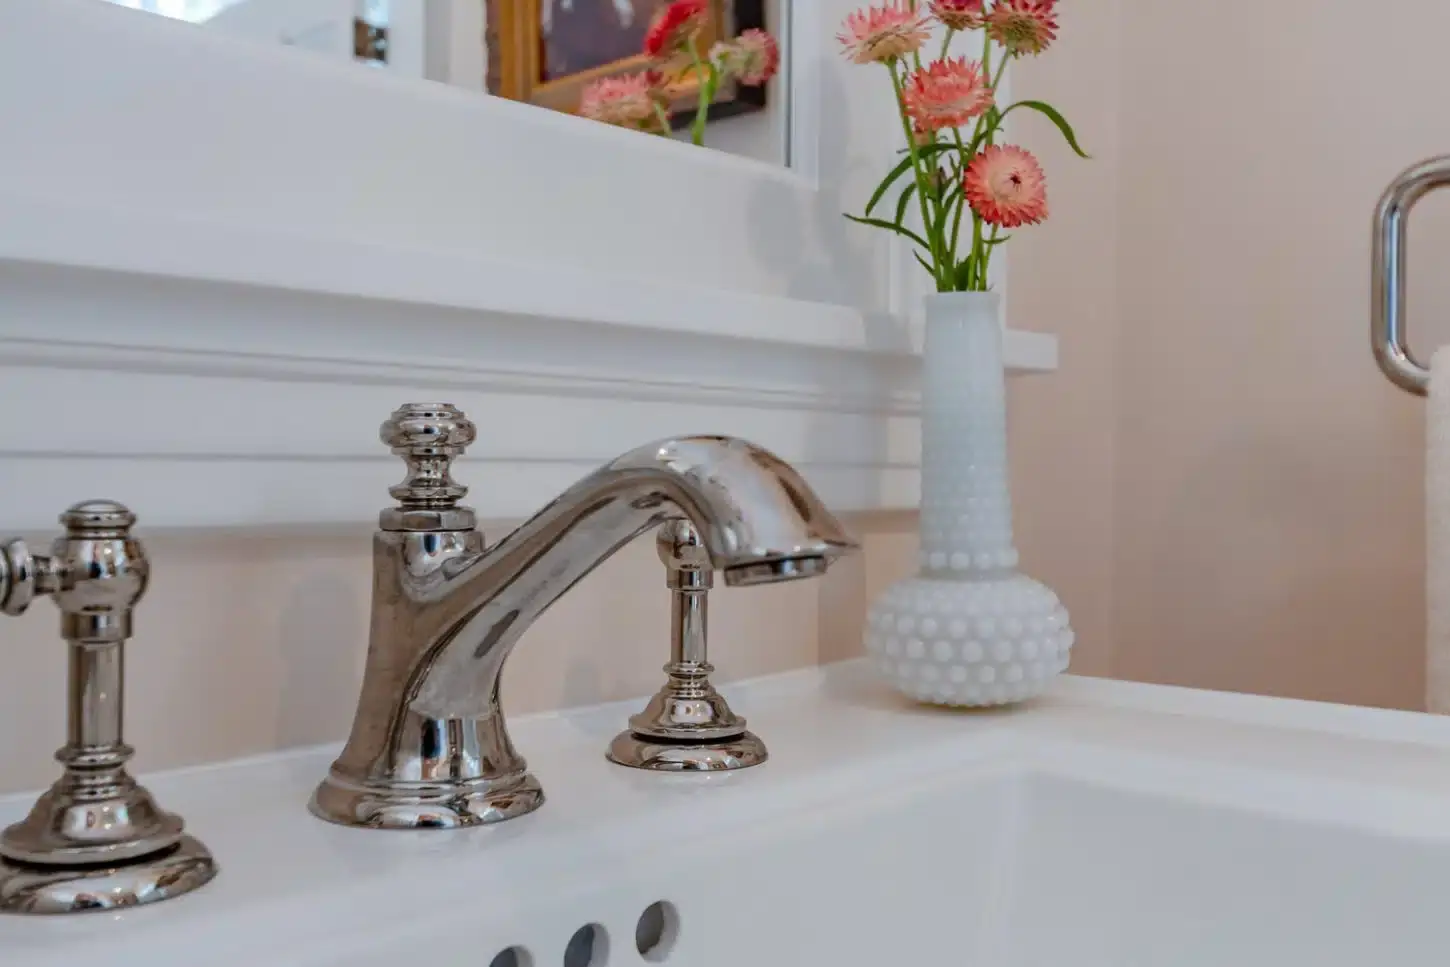 Warm-Vintage-Inspired-Powder-Room-Shaker-Heights-OH-003